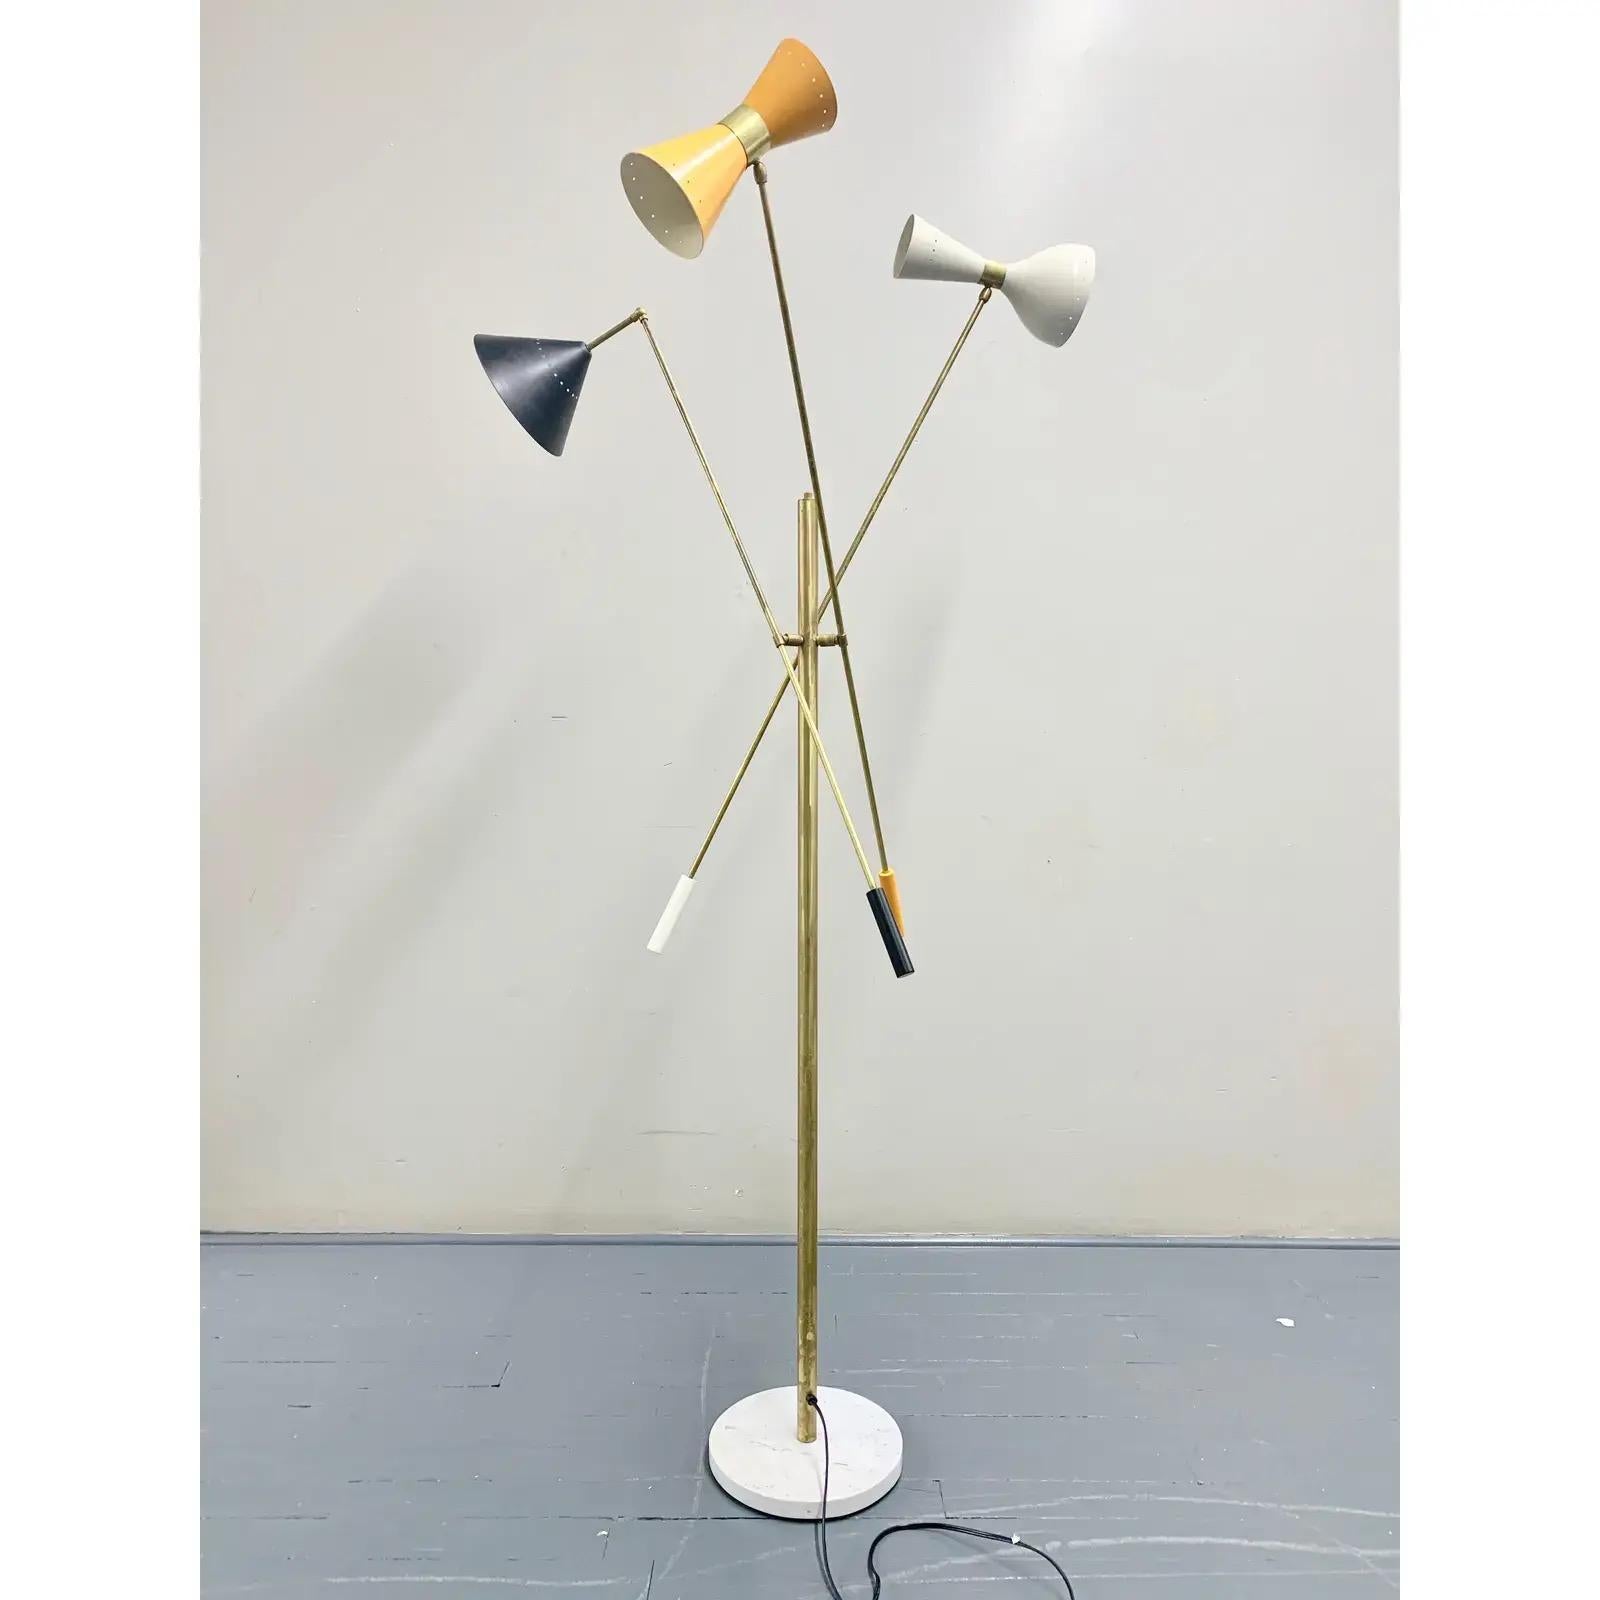 Italian mid-century style floor lamp made in Italy, adjustable, with three different shades and 5 lighting outputs. Multicolor shades: black, yellow, ivory white. Ivory white interiors. Carrara white marble base, arms and body made of solid brass